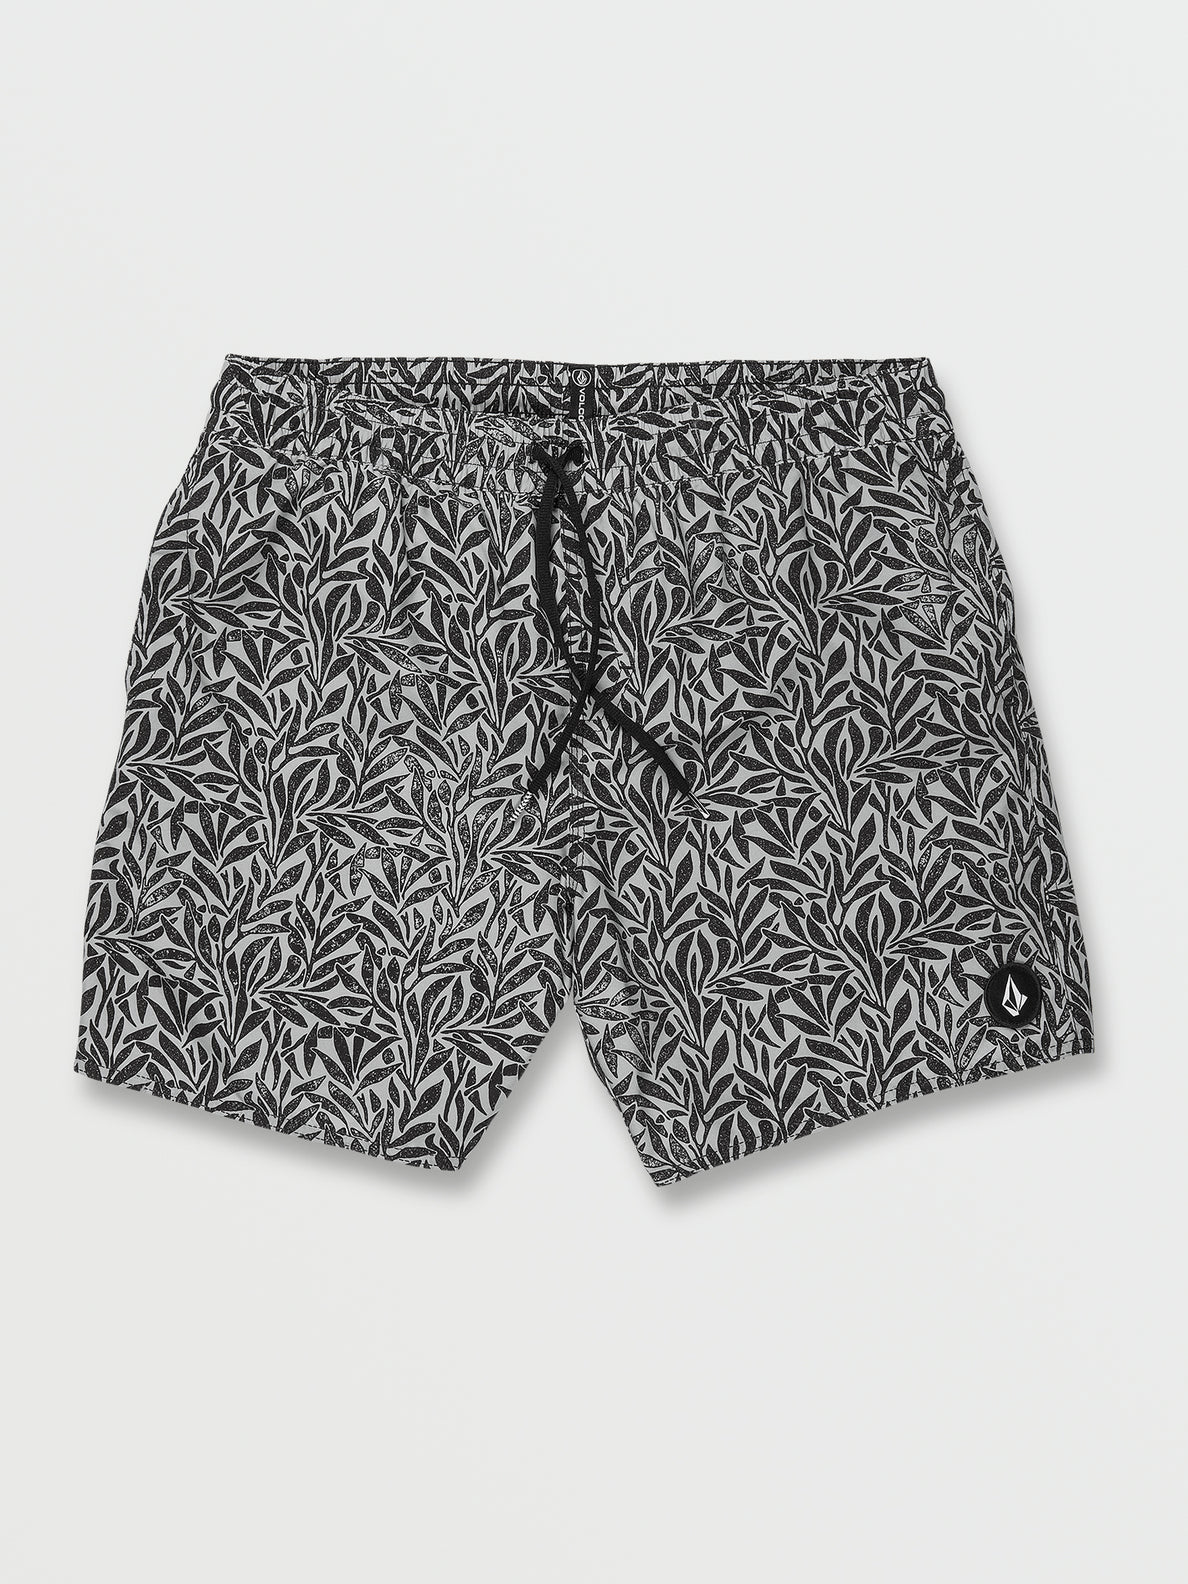 VOLCOM POLLY PACK TRUNK BOARD SHORTS ABYSS